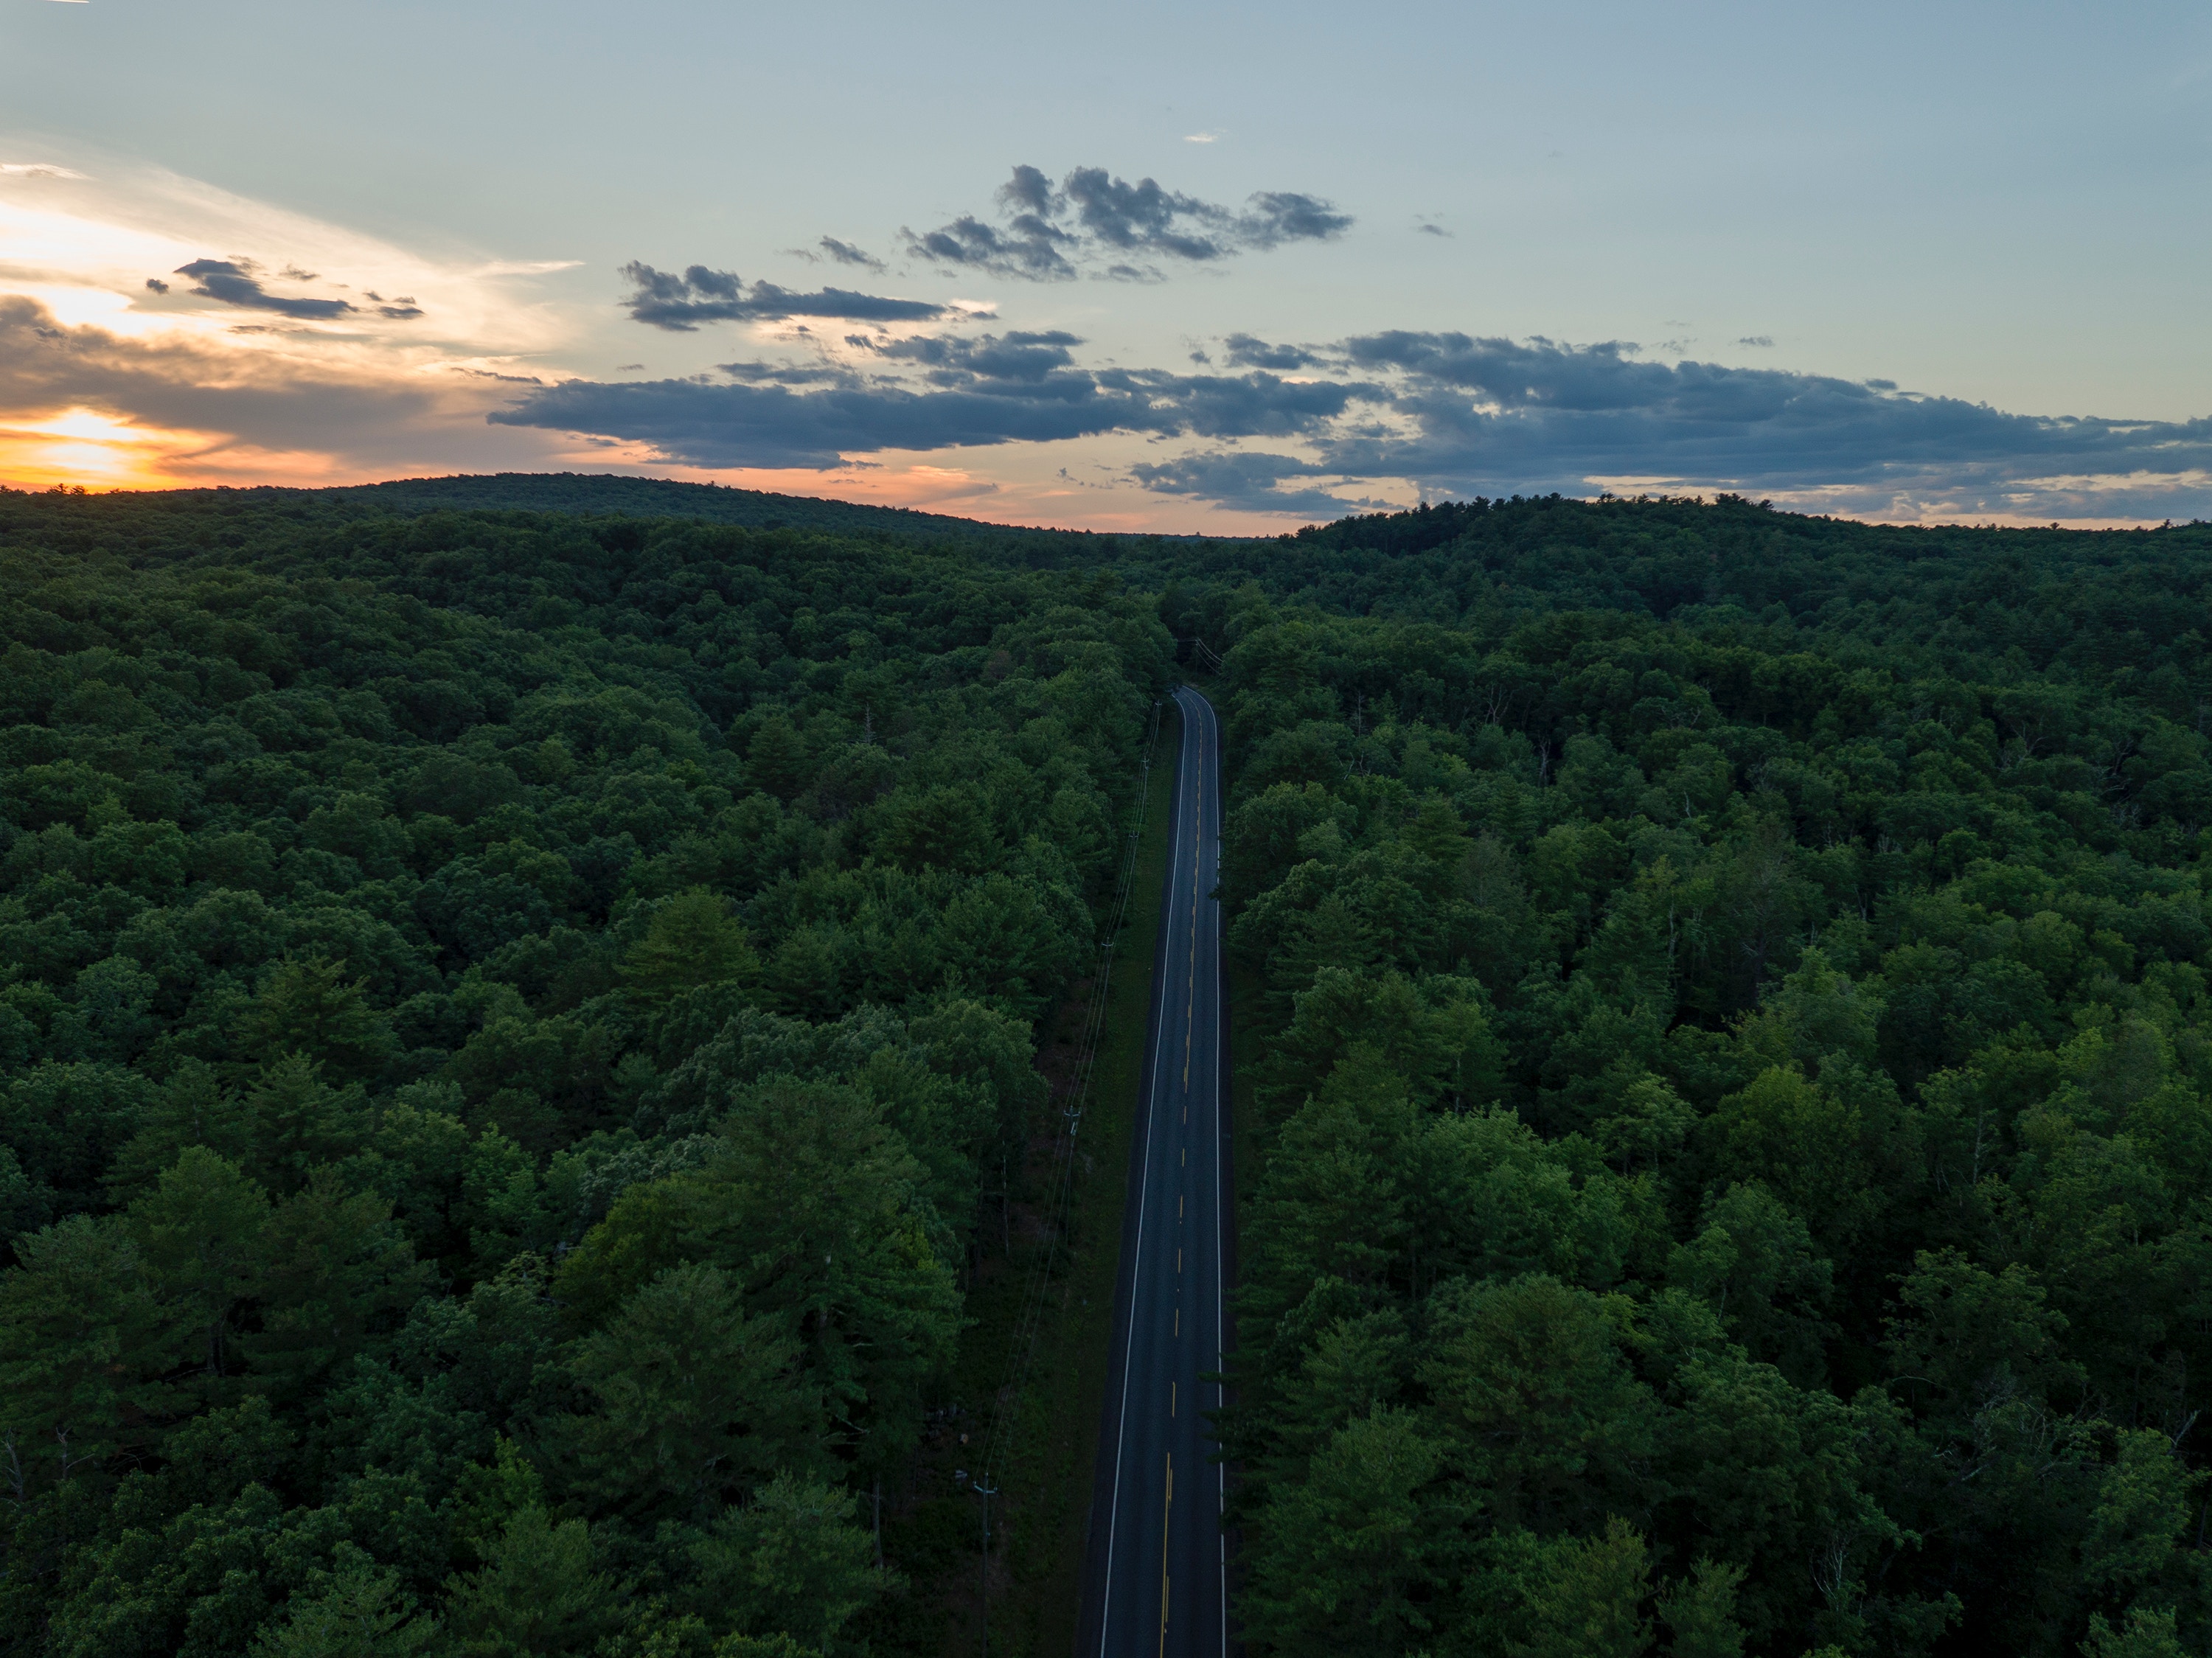 view from above, nature, sunset, horizon, road, woods, scaffolding